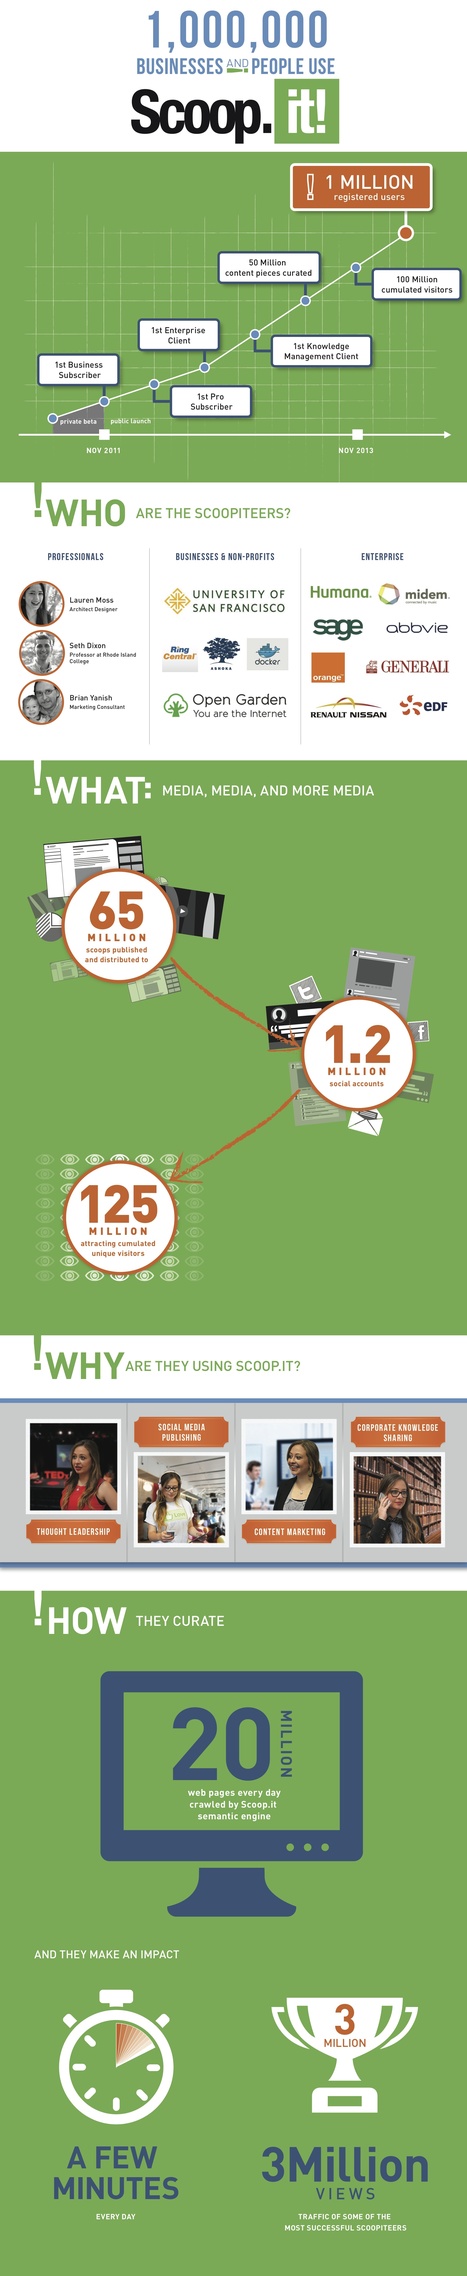 Curation: 1,000,000 people and businesses are now using Scoop.it! [Infographic] | 21st Century Learning and Teaching | Scoop.it